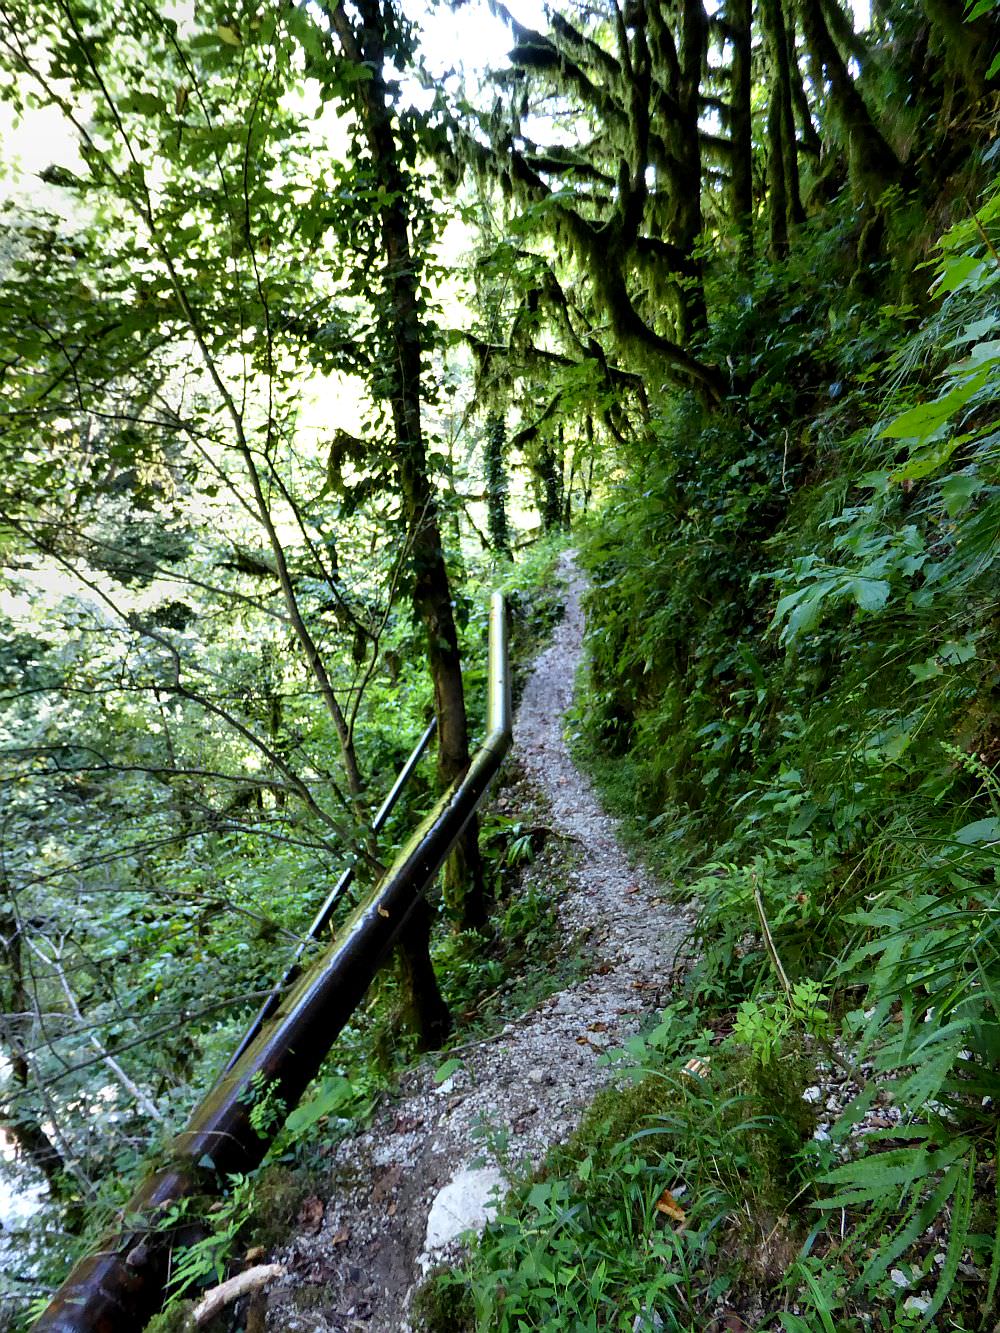 Trail heading deeper into the valley